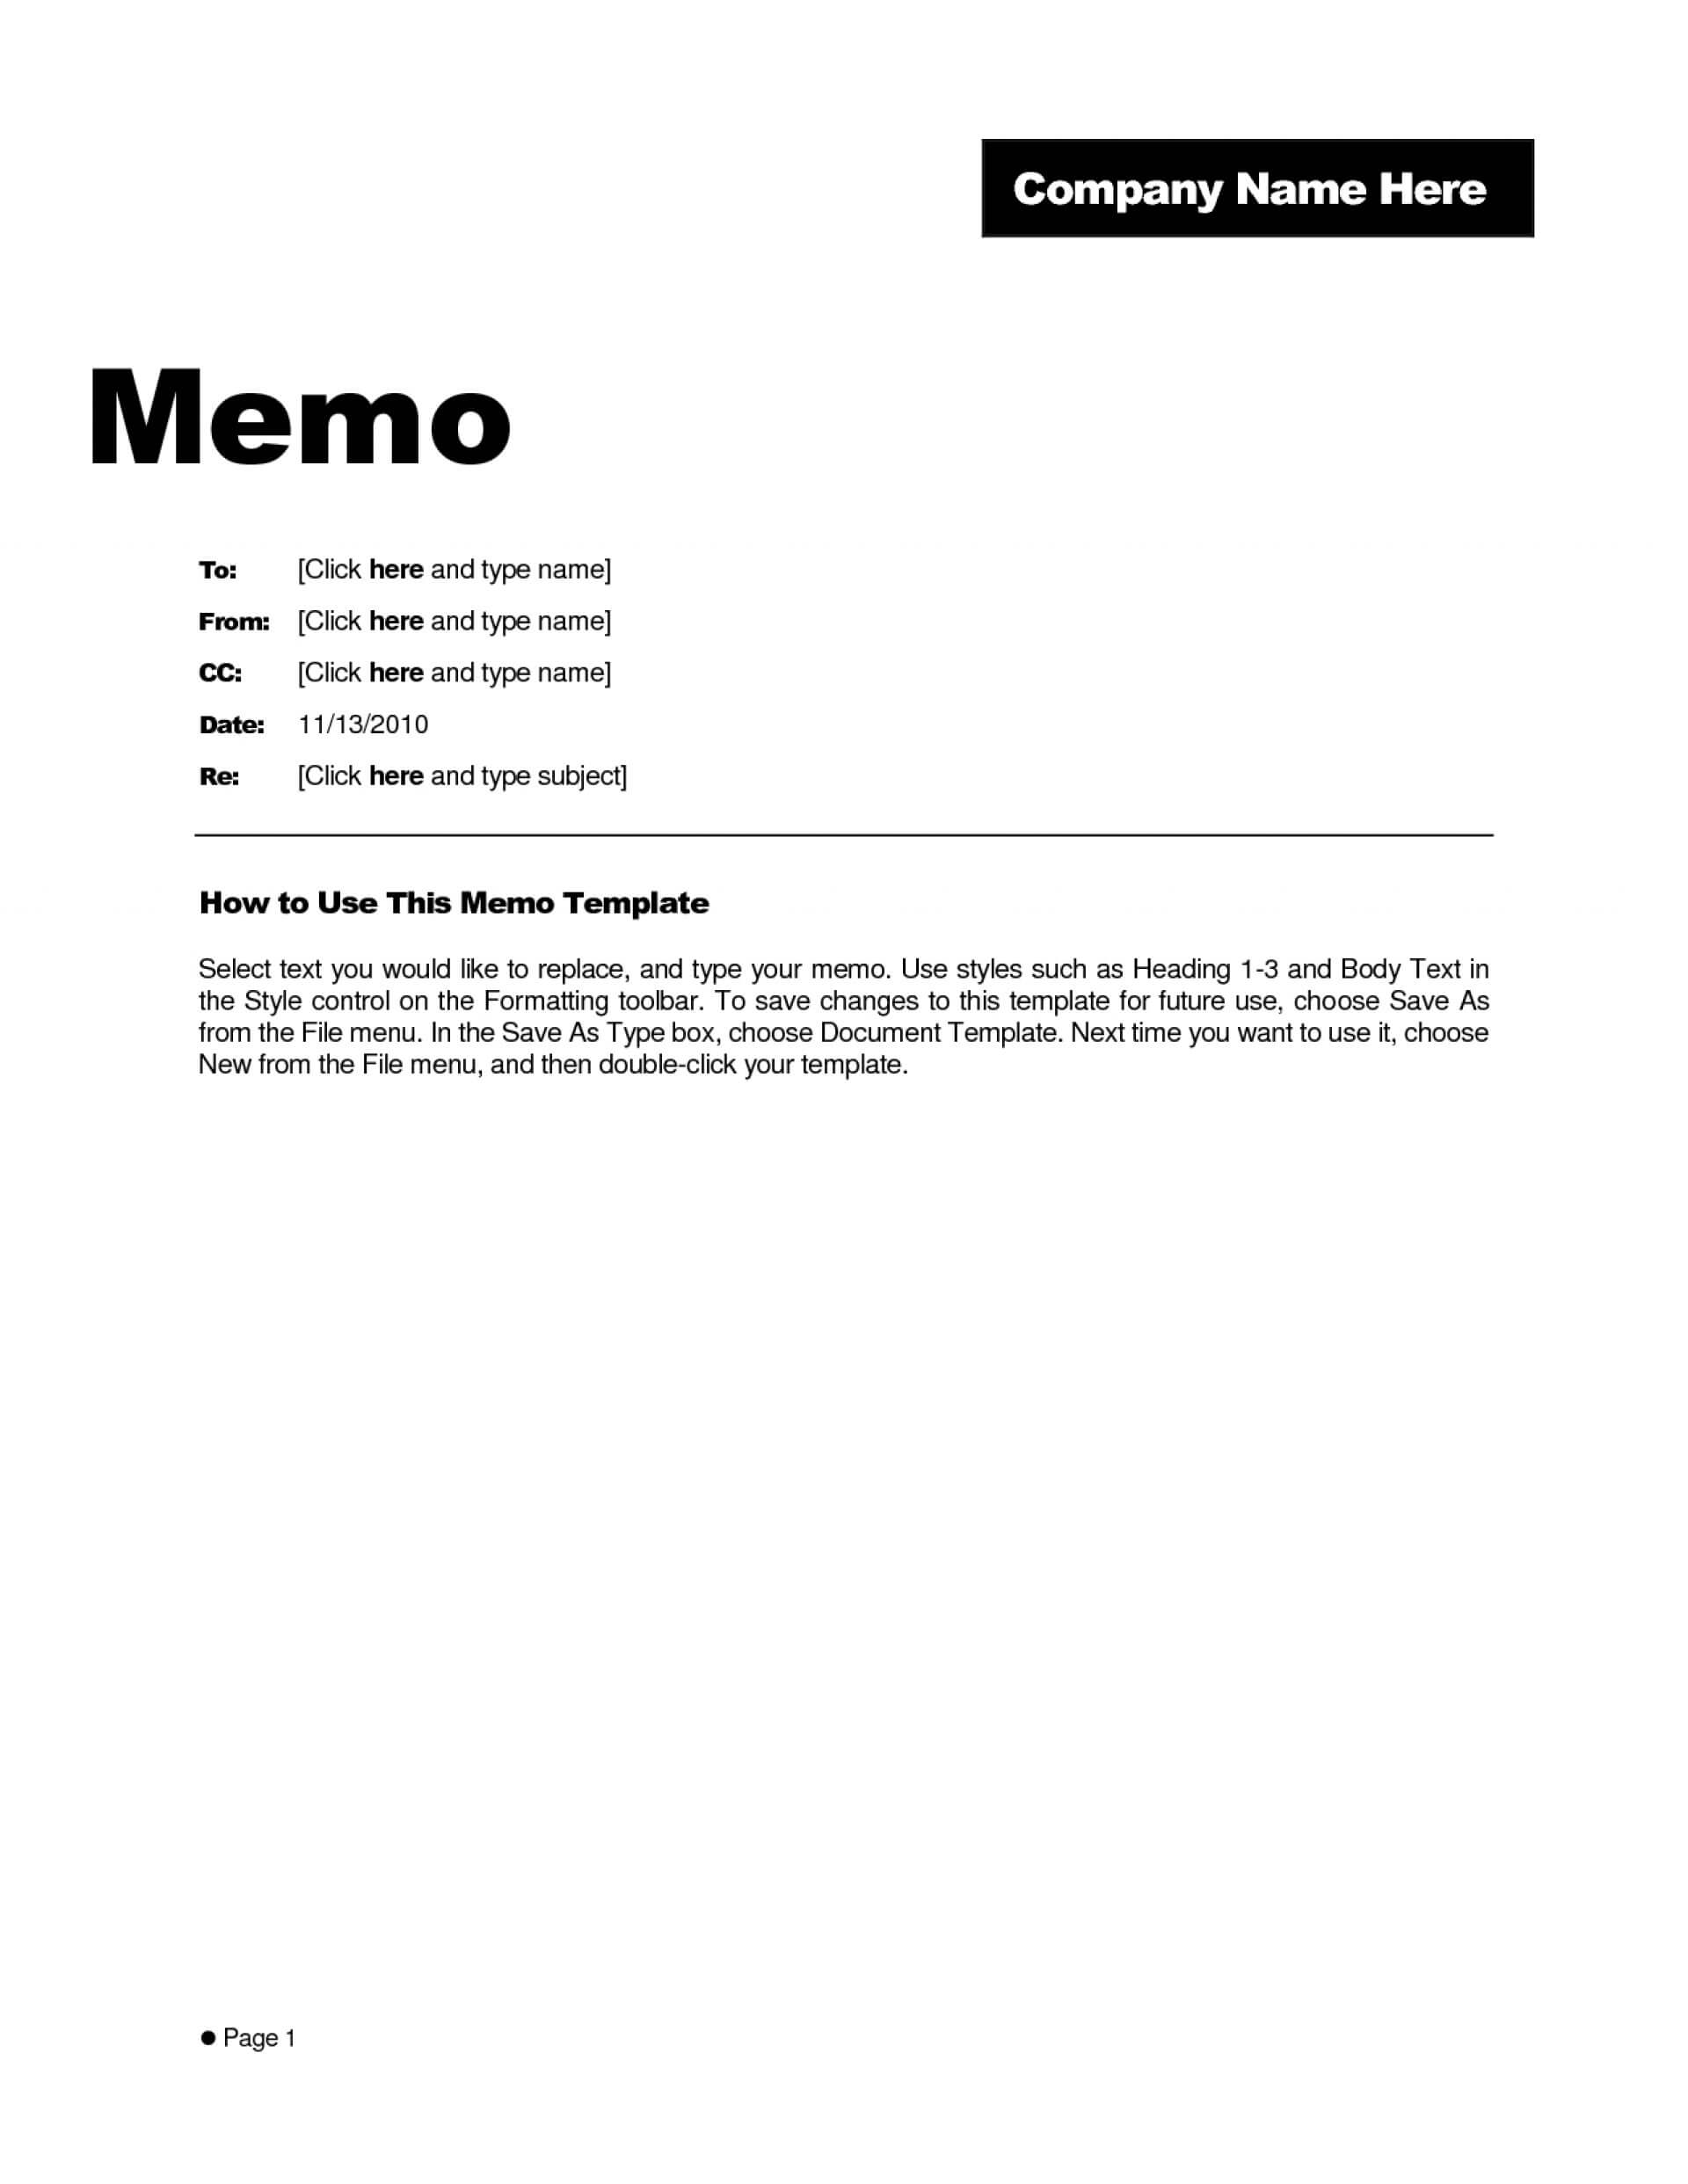 002 Memo Templates For Word Business Format Microsoft With Regard To Memo Template Word 2013